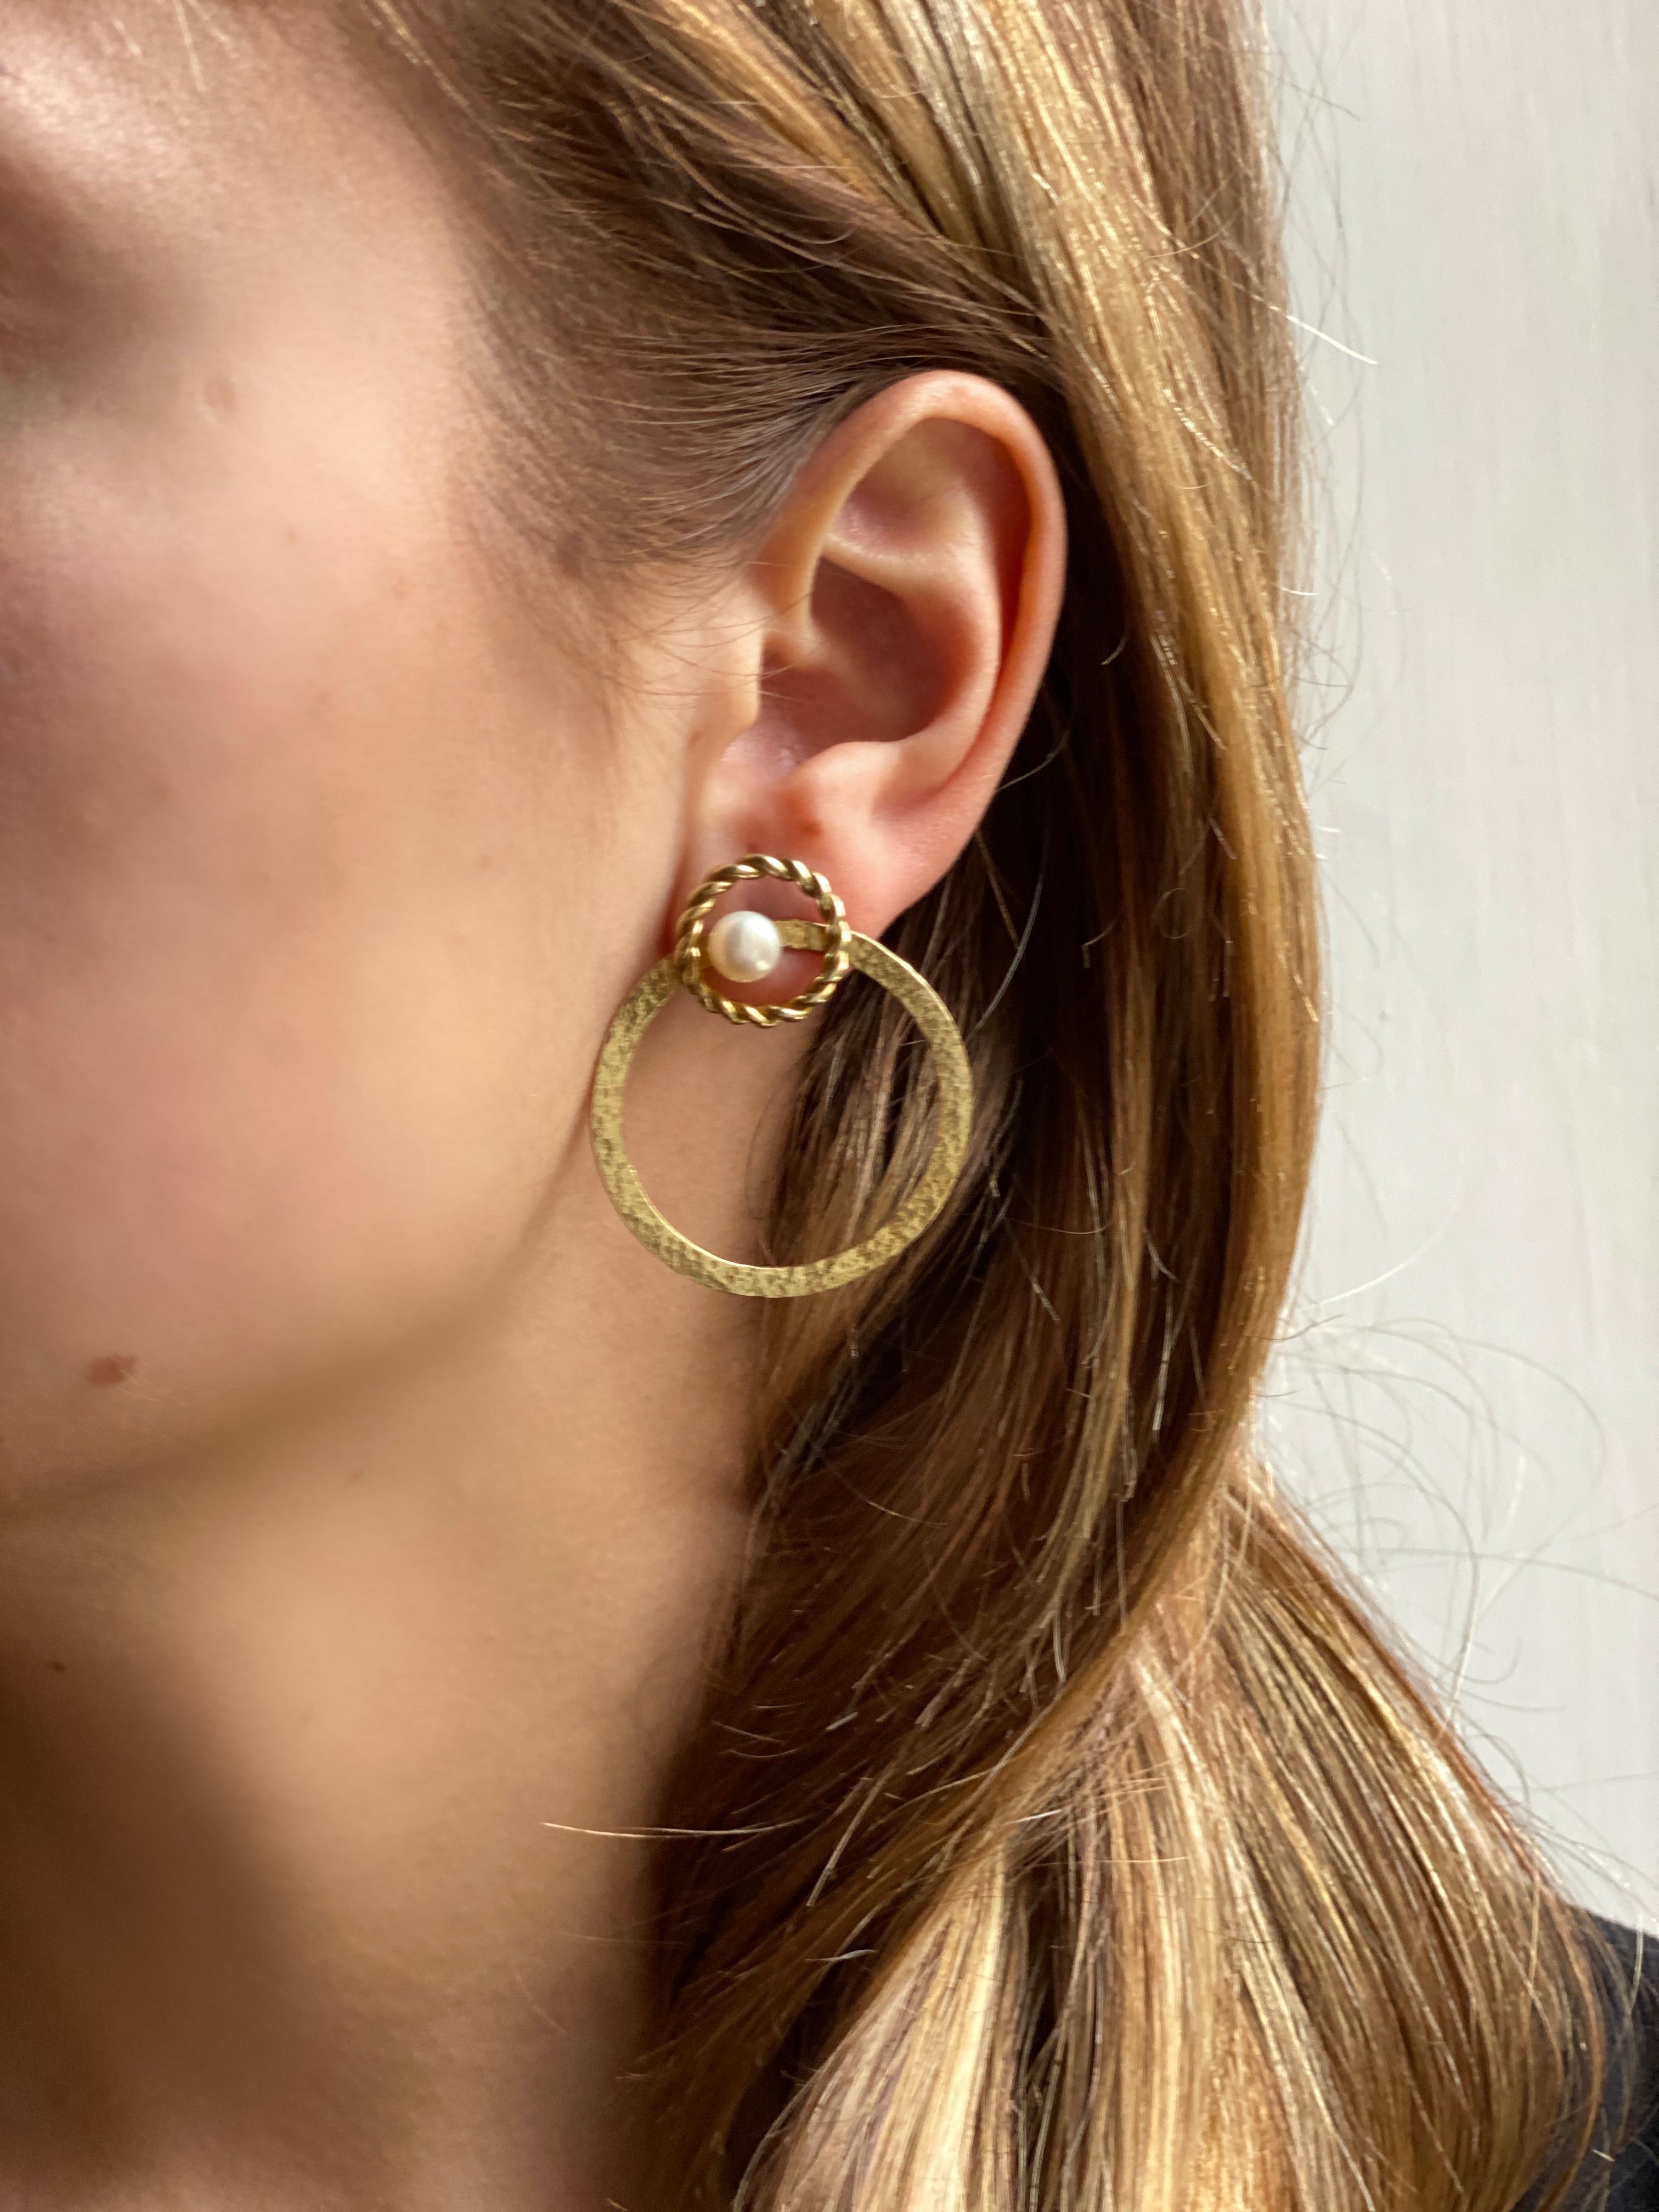 Discover Elegance in Motion with Rossella Ugolini's Hammered 18 Karats Yellow Gold Open Hoop Large Circle Artisan Modern Earrings. Meticulously handcrafted, these earrings are a testament to artisanal mastery and timeless design, featuring a